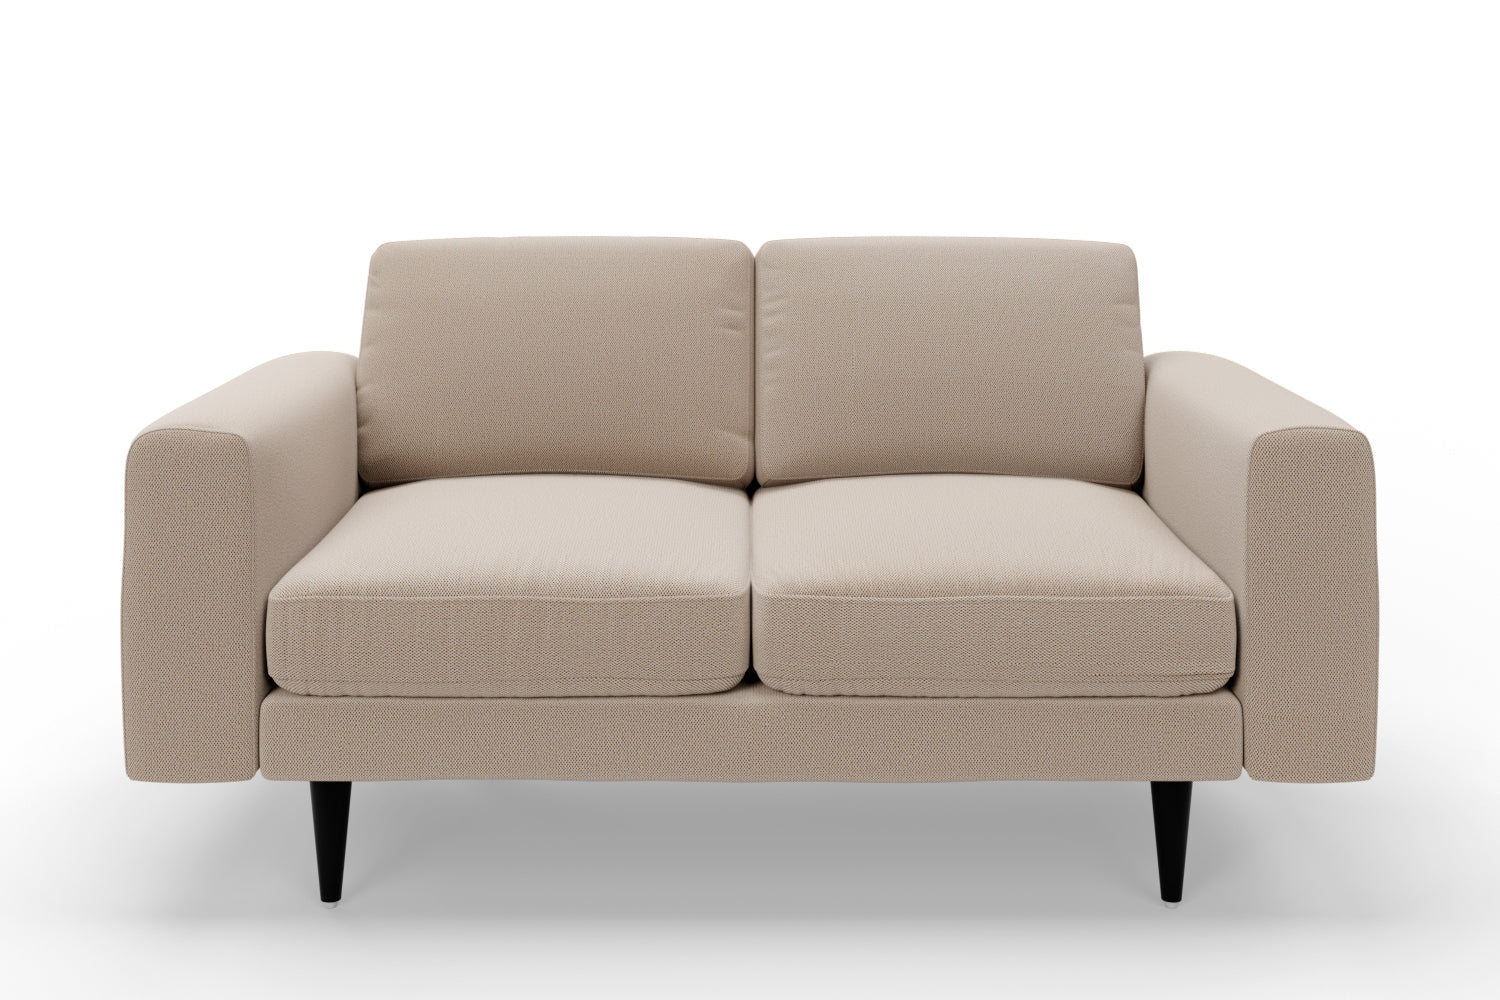 SNUG | The Big Chill 2 Seater Sofa in Oatmeal variant_40414877515824